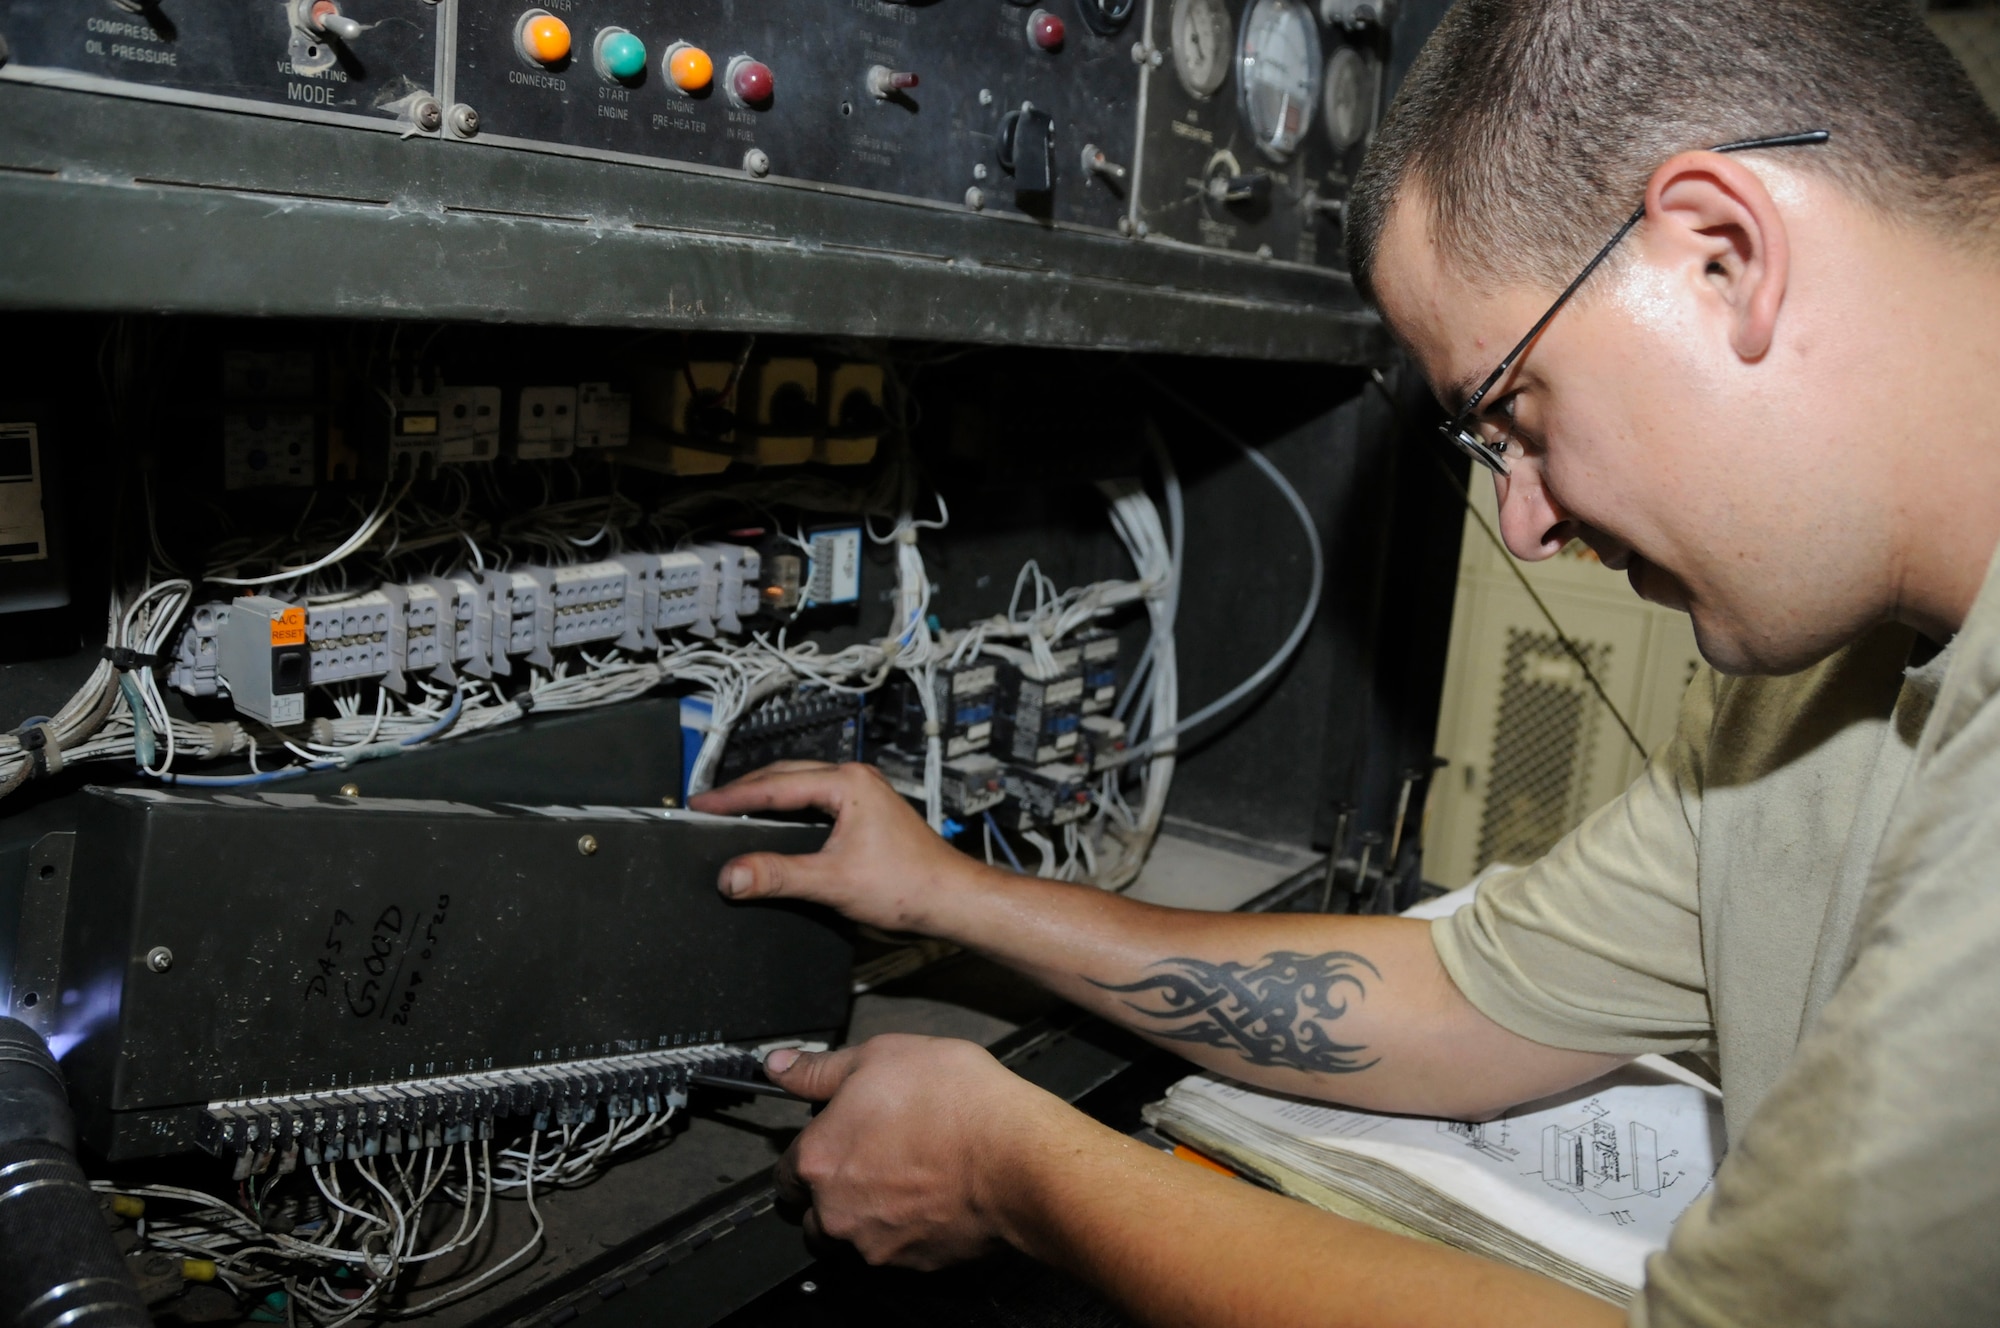 Senior Airman Eric Braland, aerospace ground equipment (AGE) maintainer, assigned to the 379th Expeditionary Maintenance Squadron, replaces a temperature control on a MA3D air conditioning unit Aug. 23, 2008, at an undisclosed air base in Southwest Asia. Airman Braland is responsible for maintaining equipment required to support Air Force aircraft while on the tarmac. Airman Braland, a native of Omaha, Neb., is deployed from Offutt Air Force Base, Neb., in support of Operations Iraqi Freedom, Enduring Freedom and Joint Task Force-Horn of Africa. (U.S. Air Force photo by Staff Sgt. Darnell T. Cannady/Released)